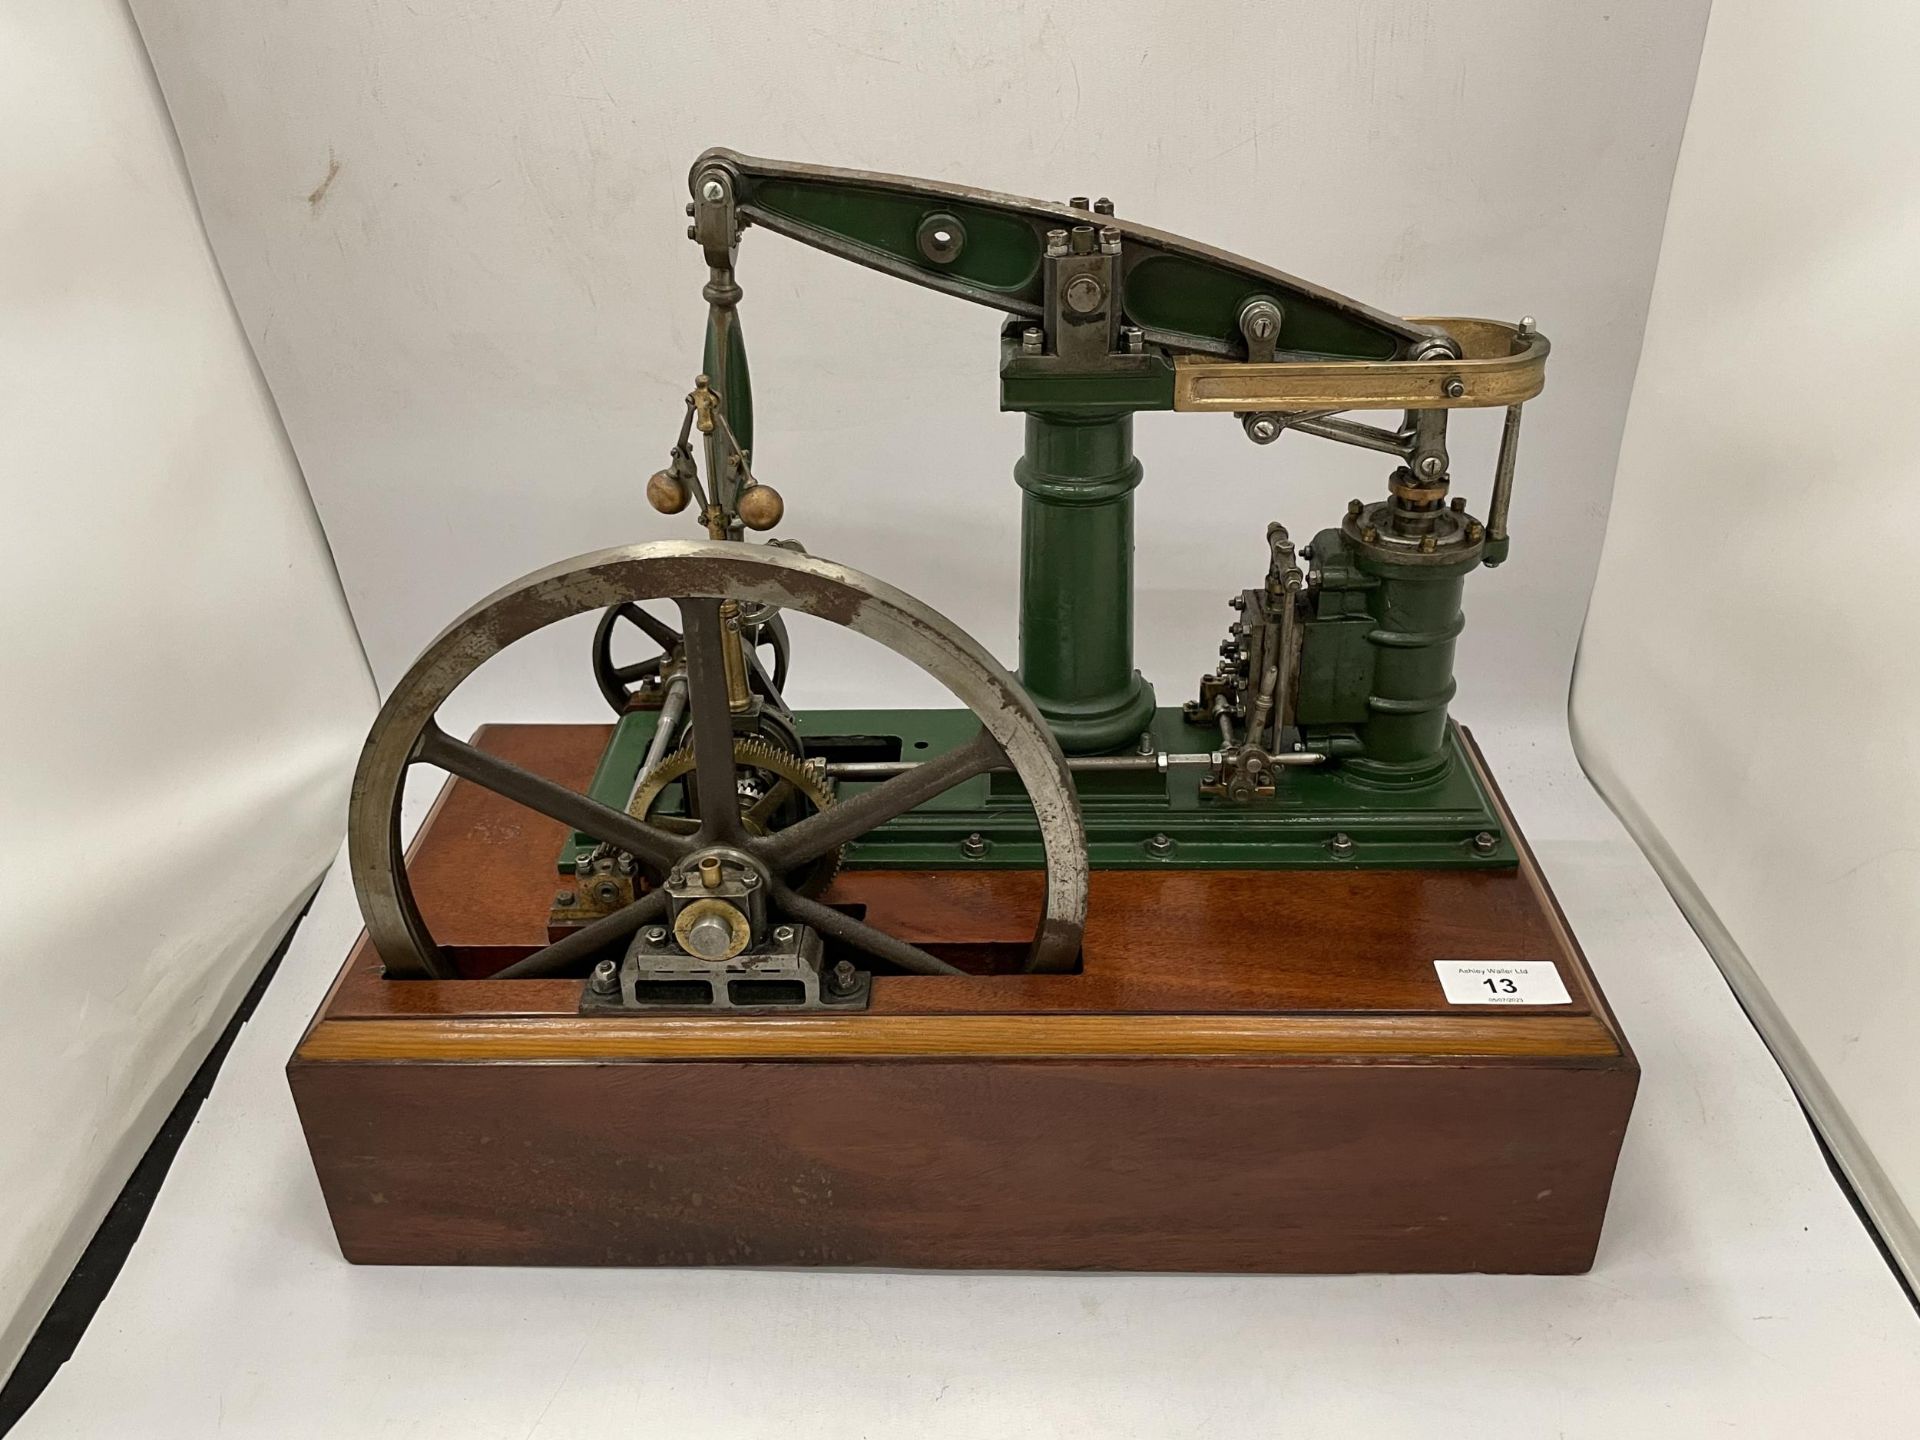 A VINTAGE STATIONARY STEAM ENGINE WHICH CAN RUN OFF COMPRESSED AIR OR STEAM